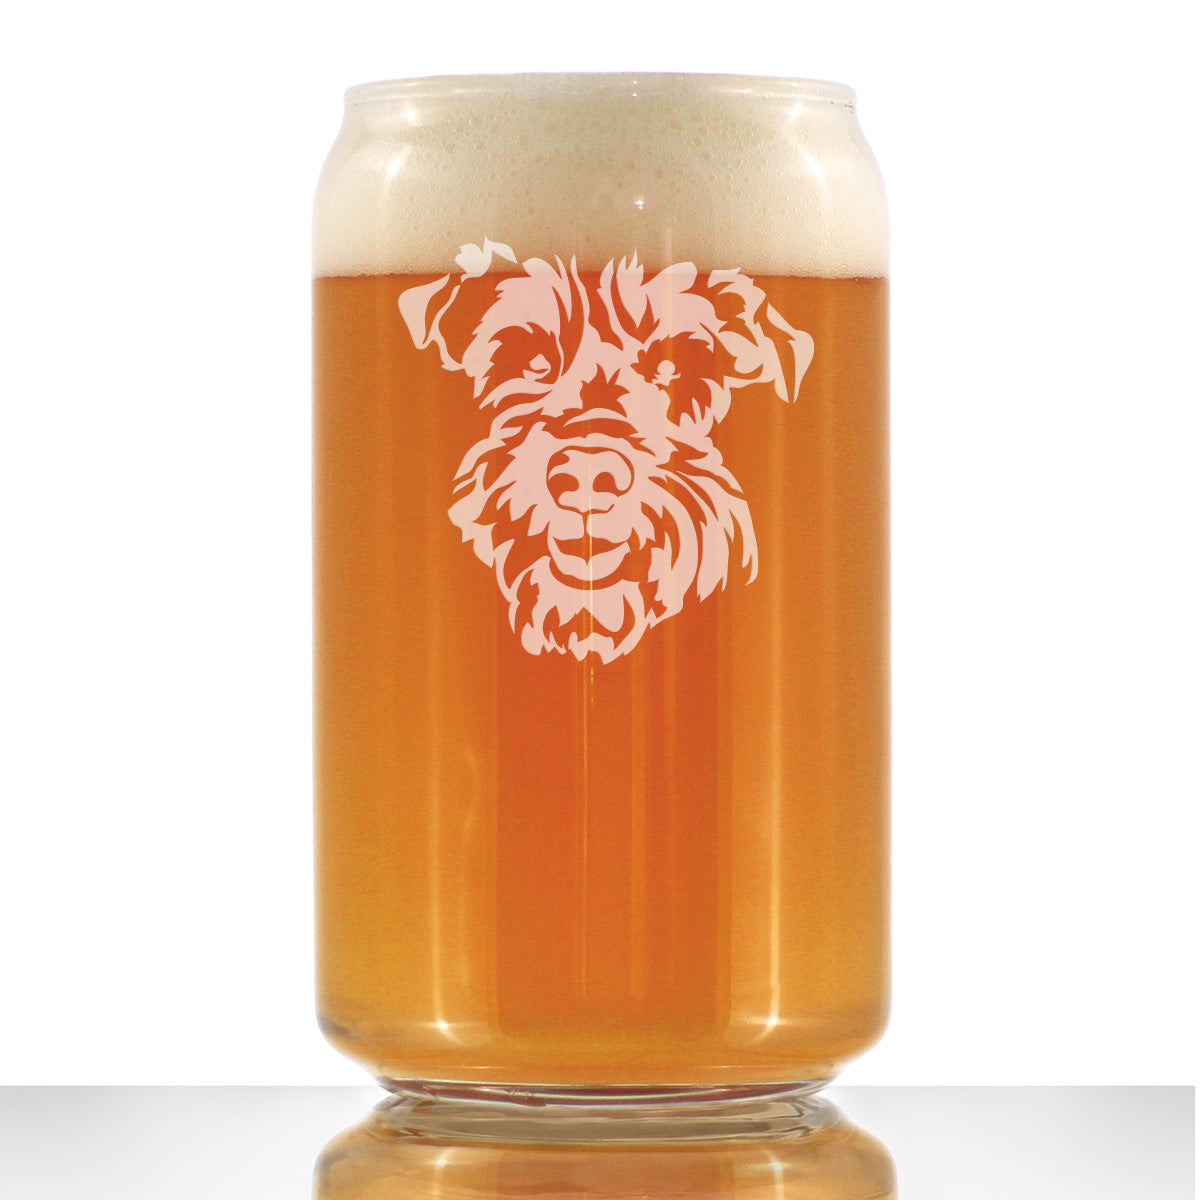 Schnauzer Face Beer Can Pint Glass - Unique Dog Themed Decor and Gifts for Moms &amp; Dads of Schnauzers - 16 Oz